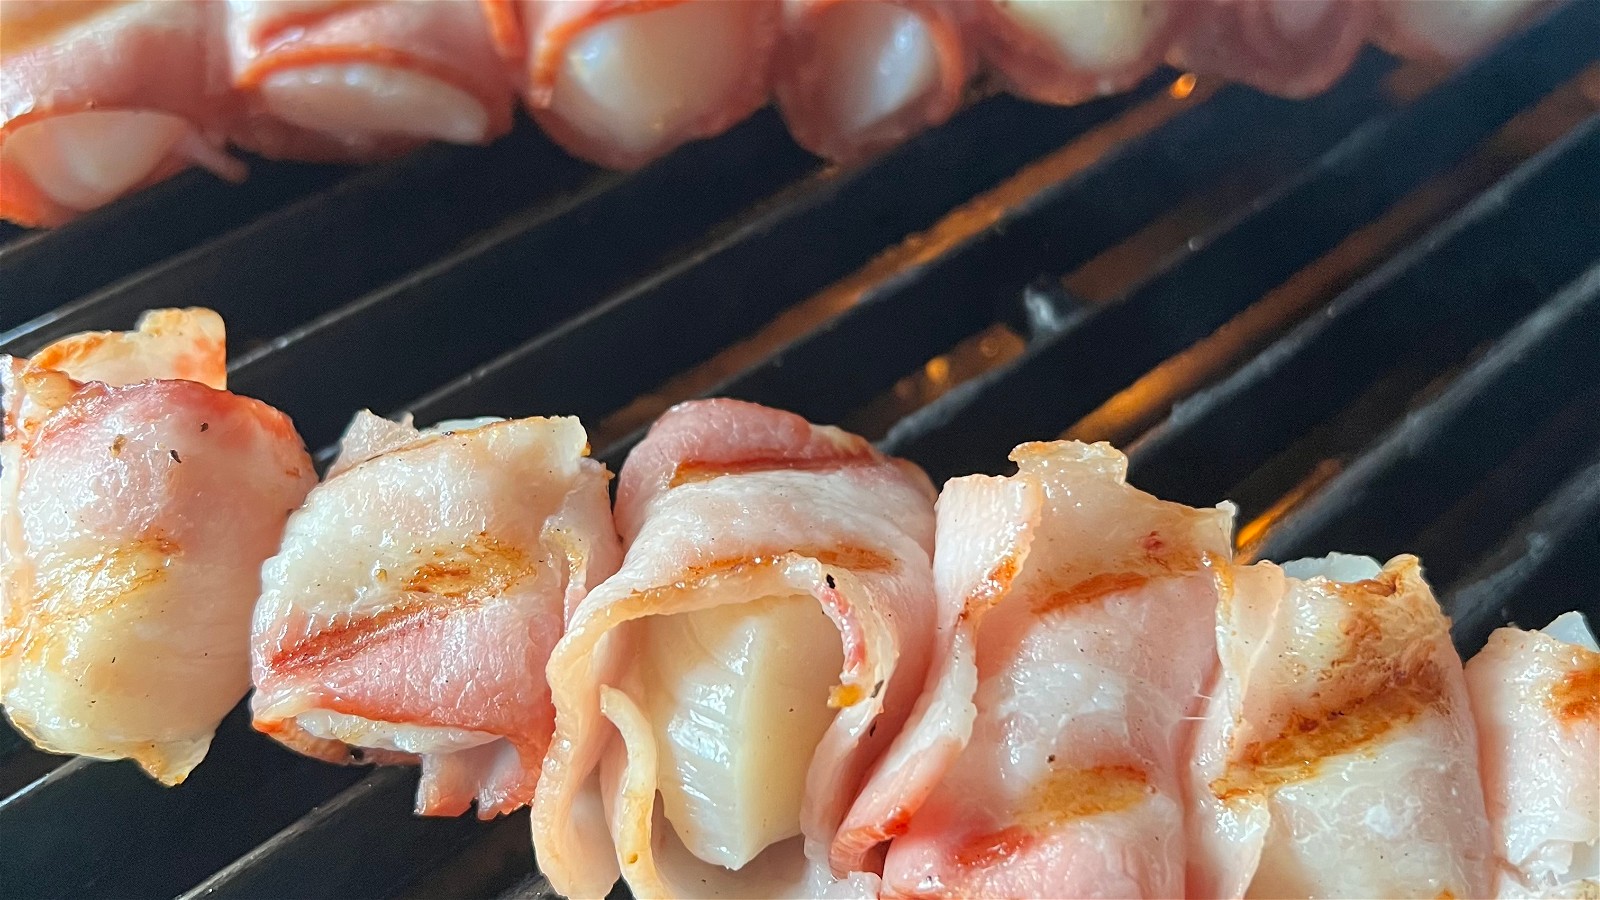 Image of Willard’s Kitchen Bacon Wrapped Grilled Scallops